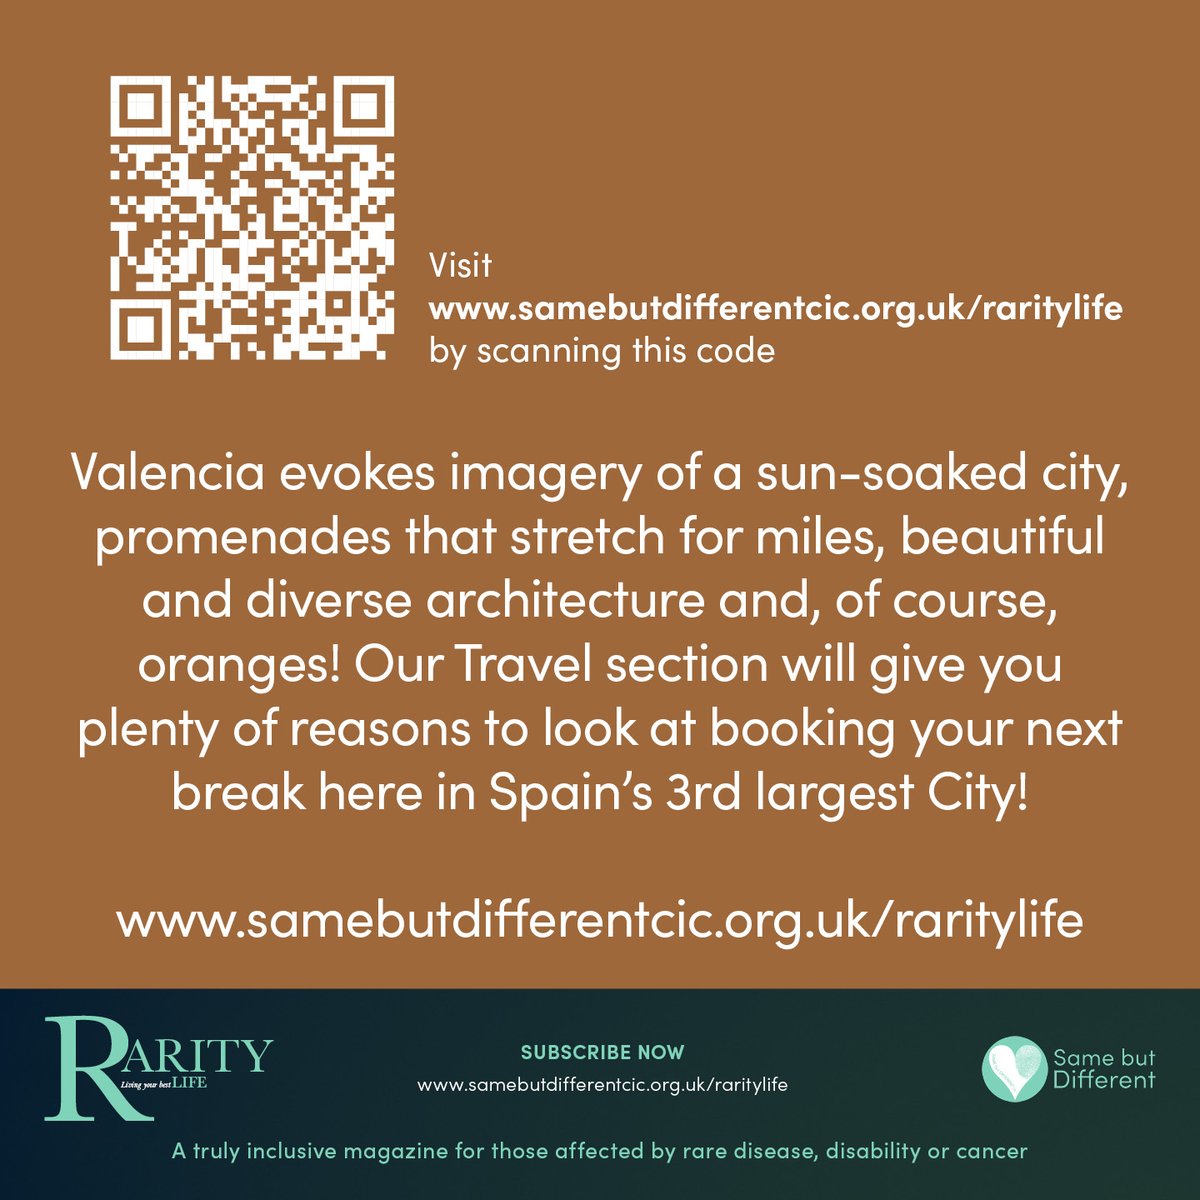 Head over to #RarityLife to plan your next trip to a beautiful, sunny city that offers everything you need in a break, Valencia! samebutdifferentcic.org.uk/raritylife #raredisease #cancer #disabilty #accessibletravel #citybreaks #nationallottery @ValenciaCity @love_valencia @spain